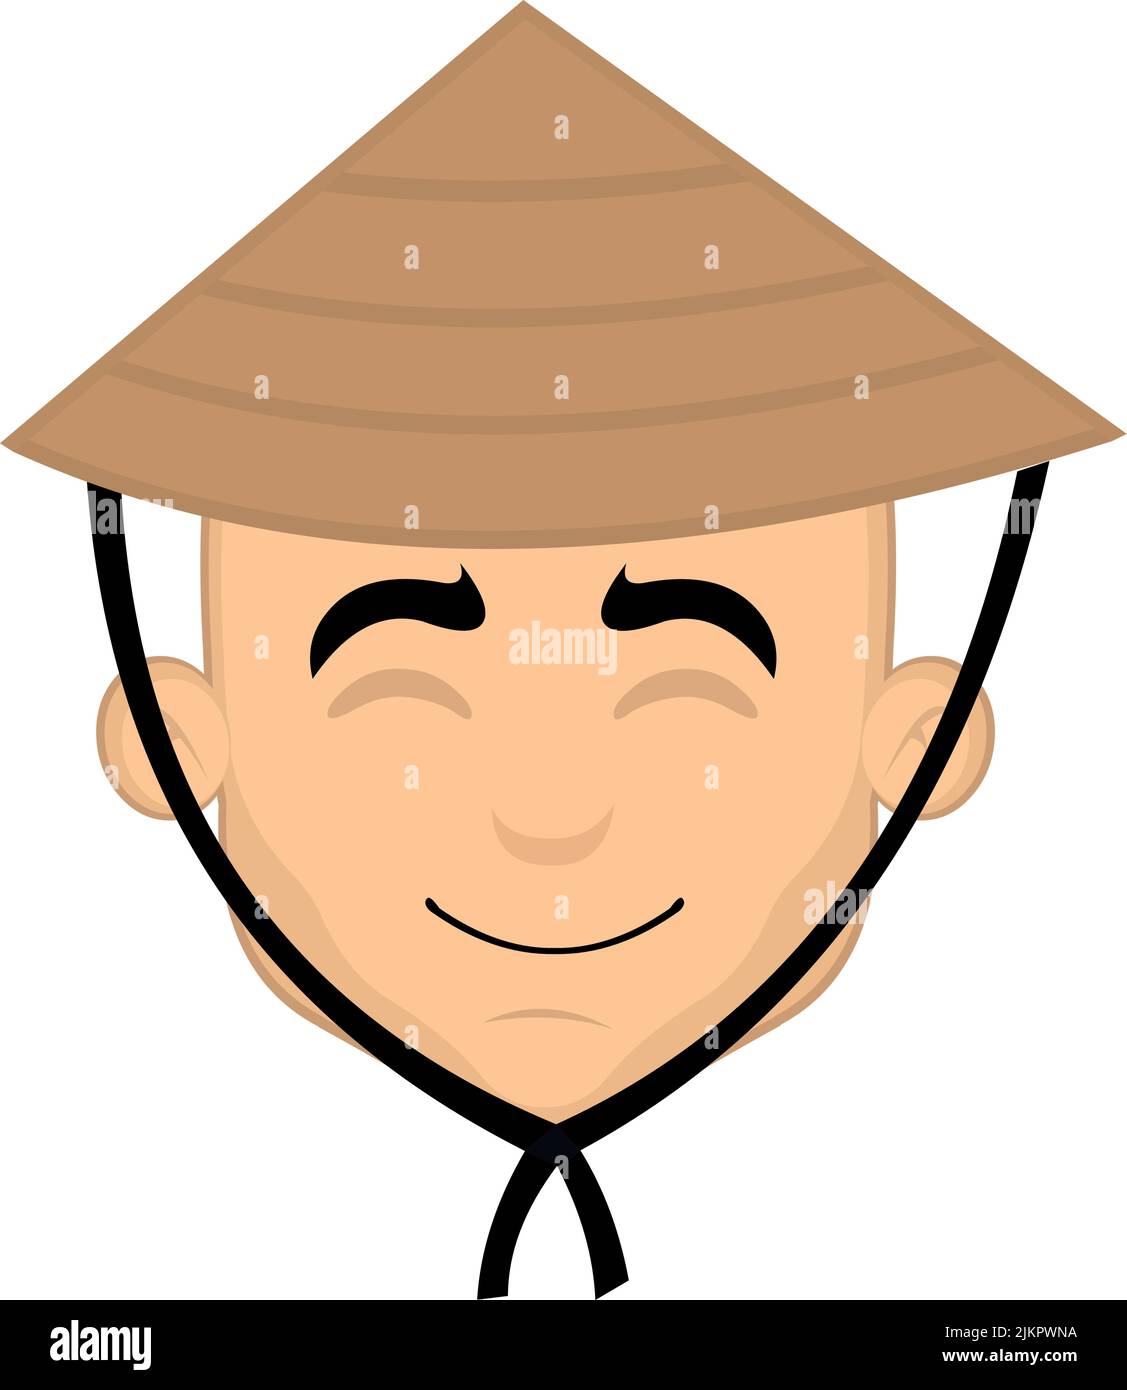 Vector illustration of a cartoon man's face with a cheerful expression and a classic chinese culture hat Stock Vector